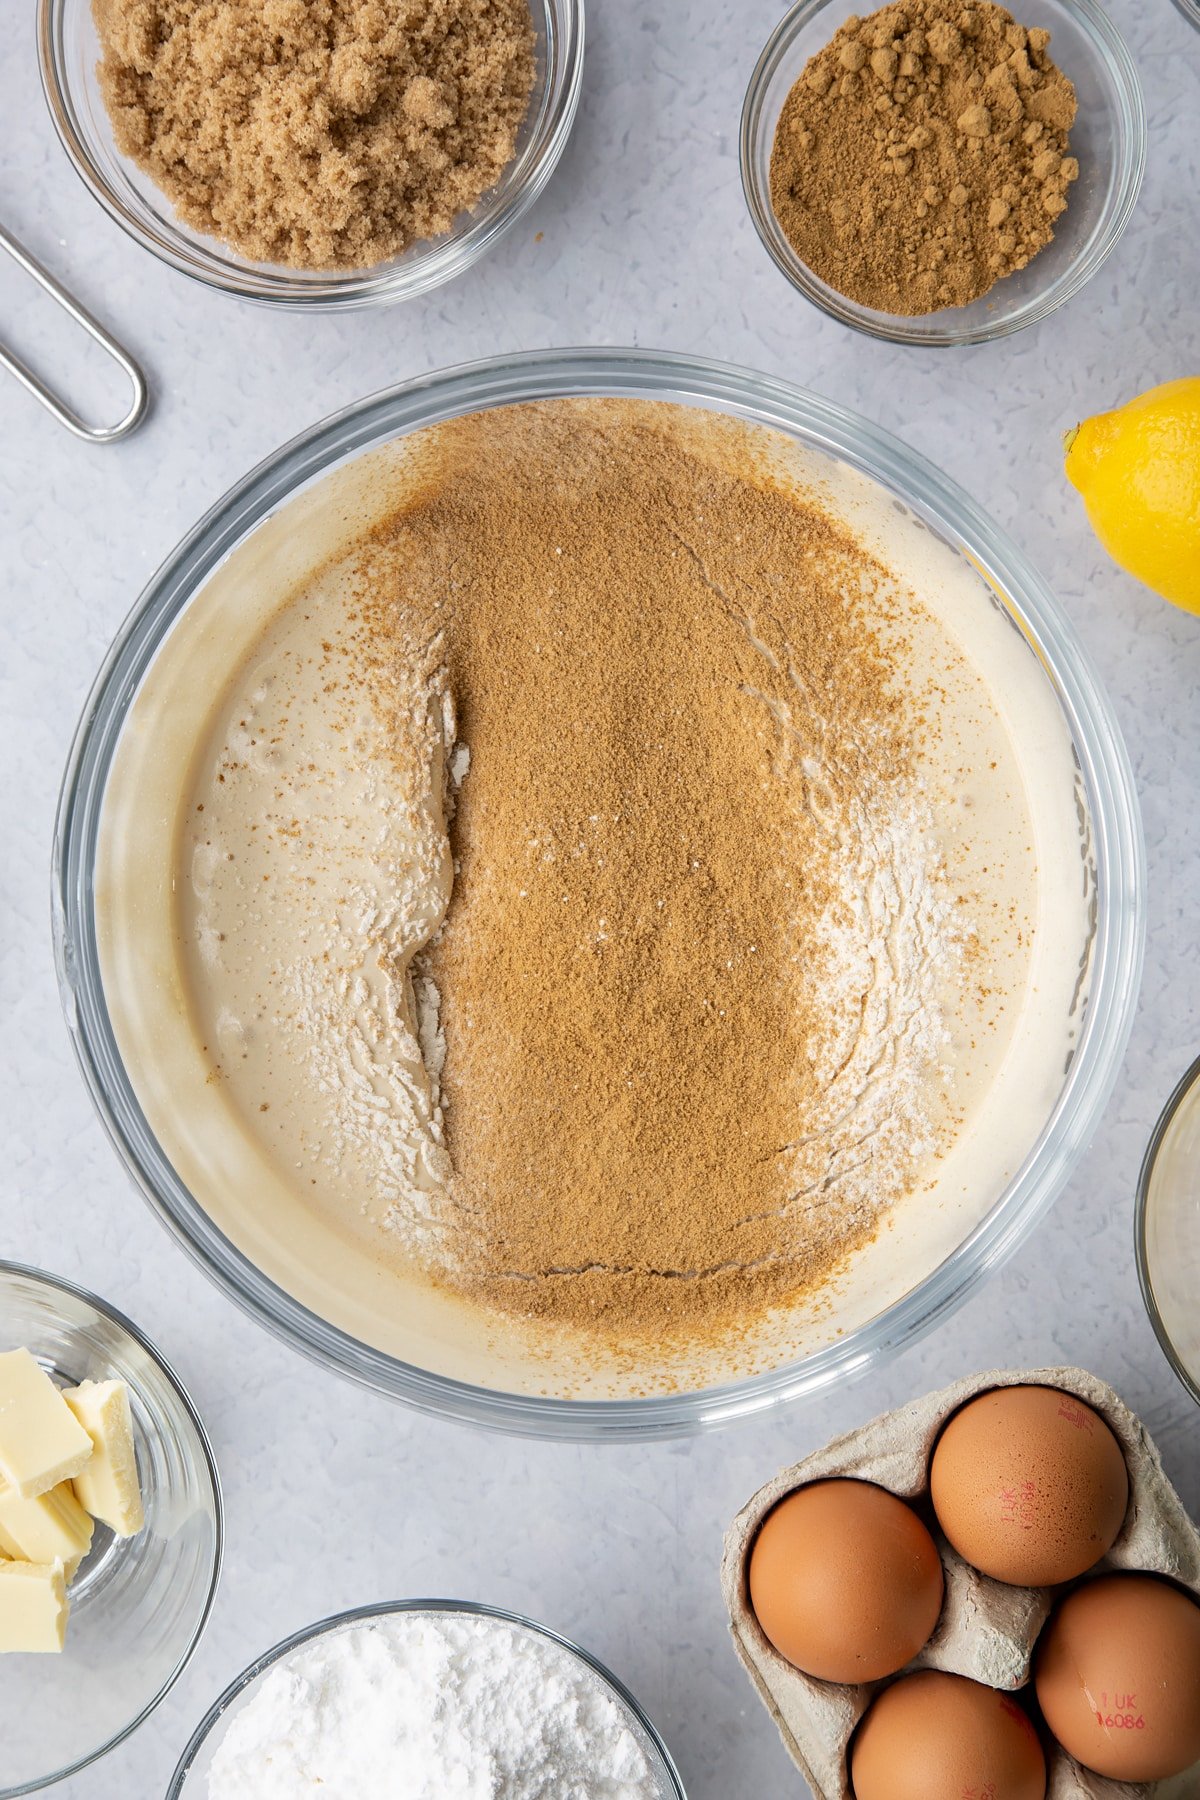 Eggs and light soft brown sugar whisked to a pale, thick mixture in a glass mixing bowl with flour and ginger on top. Ingredients to make Gingerbread Swiss roll surround the bowl.